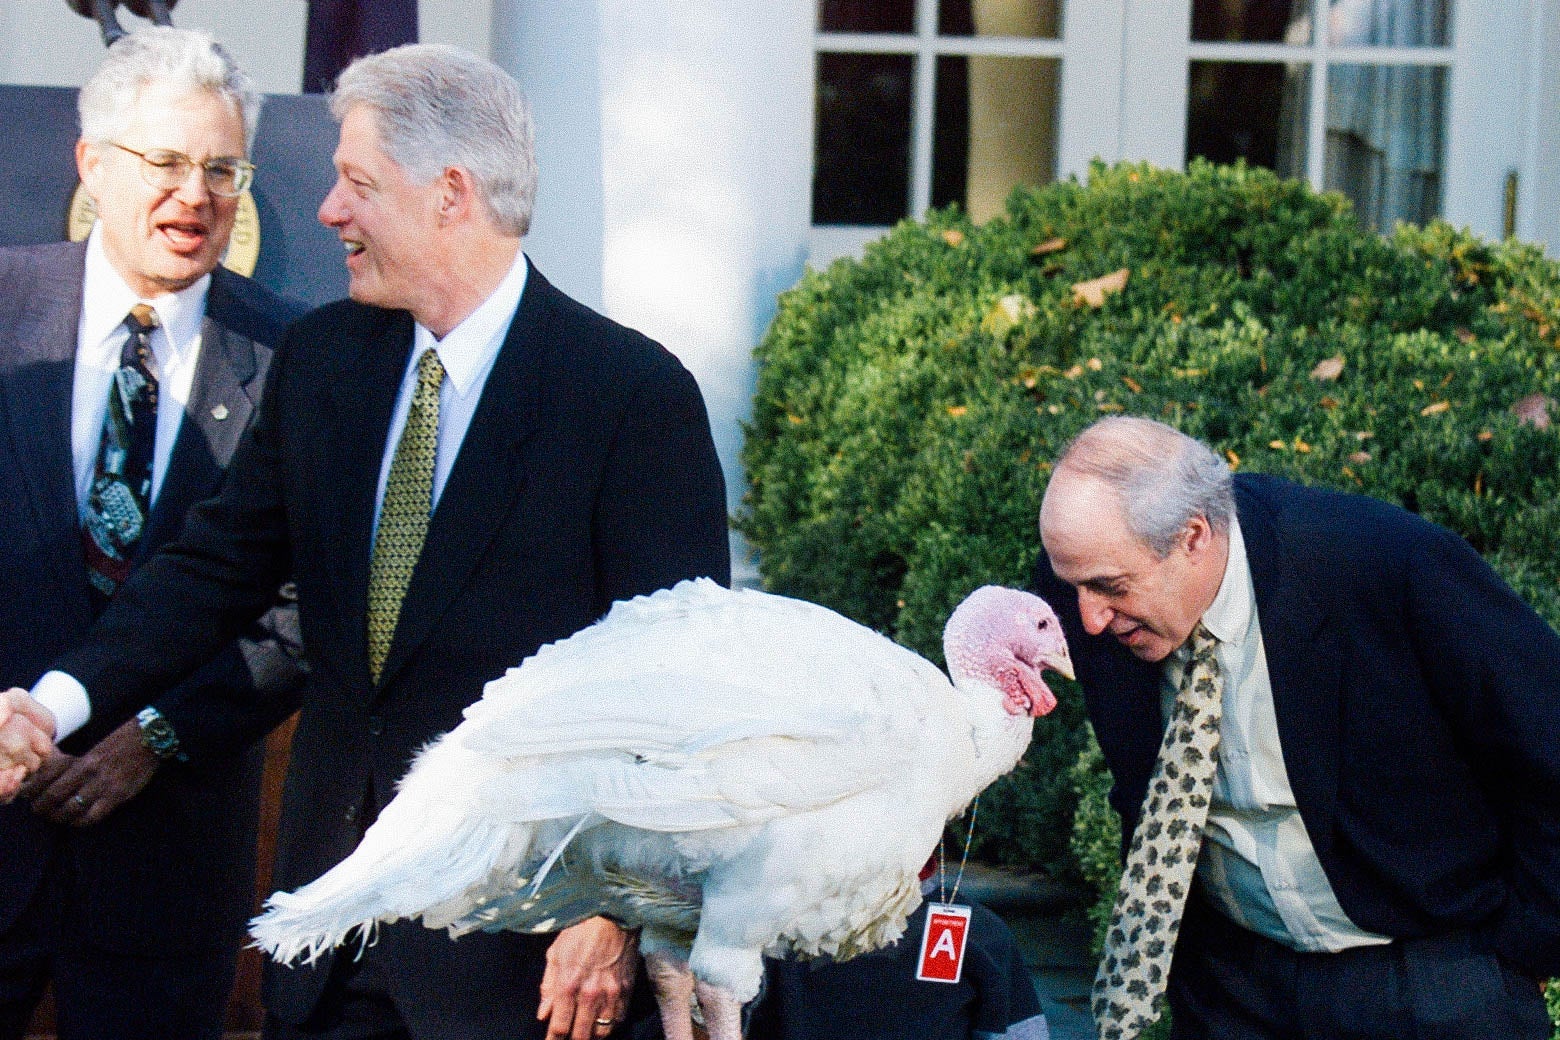 A man in a suit bends down to put his face up to a turkey. Bill Clinton stands next to them.